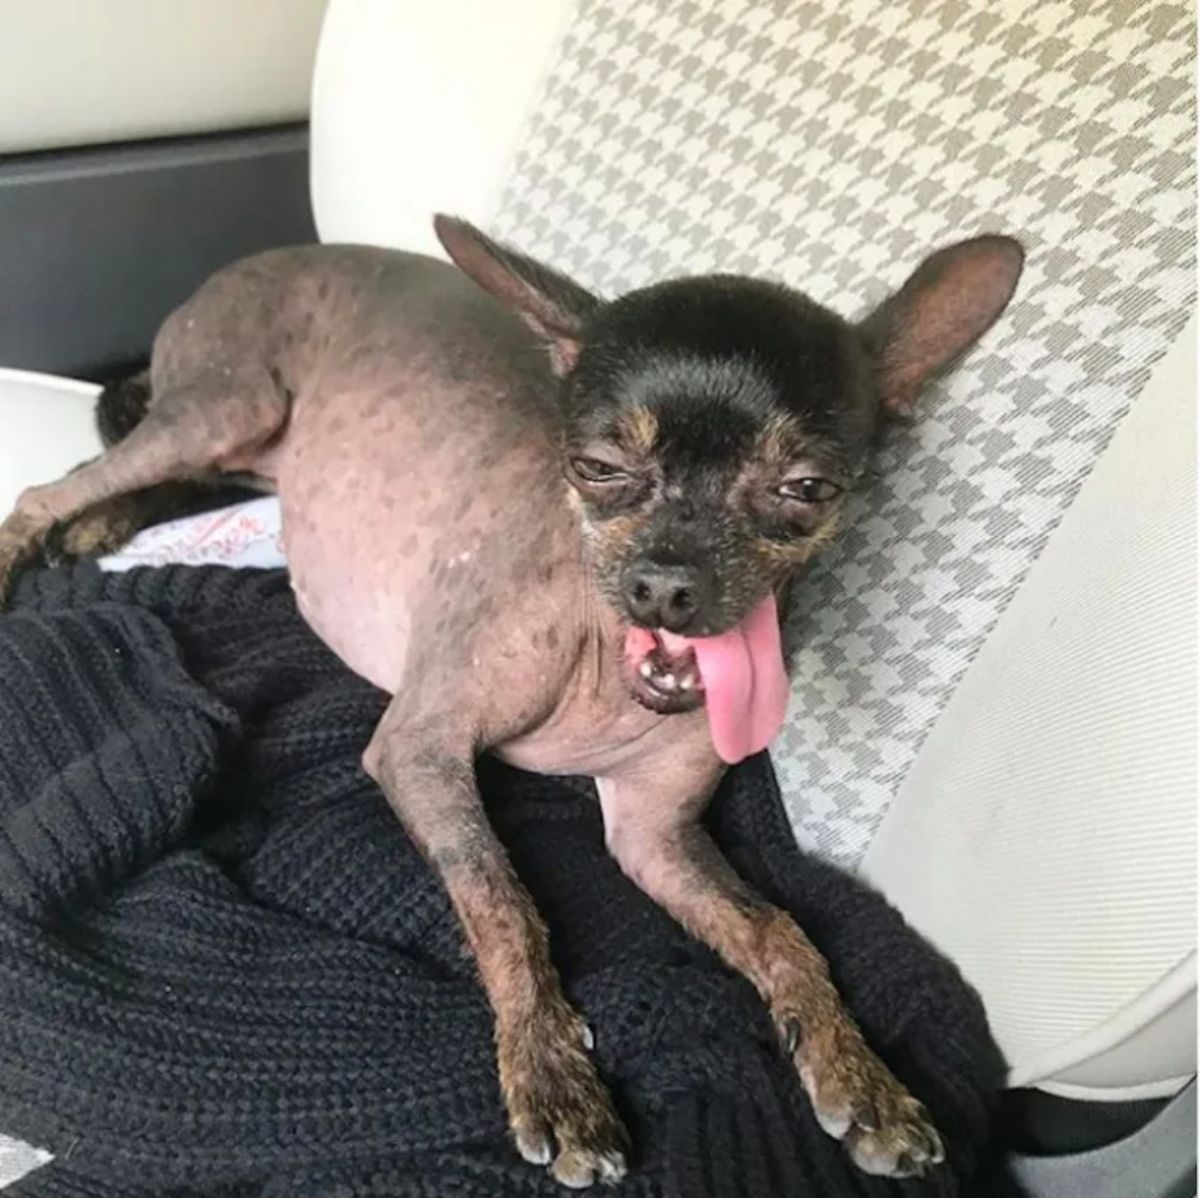 hairless black dog with the tongue hanging out laying on a black blanket on a white car seat